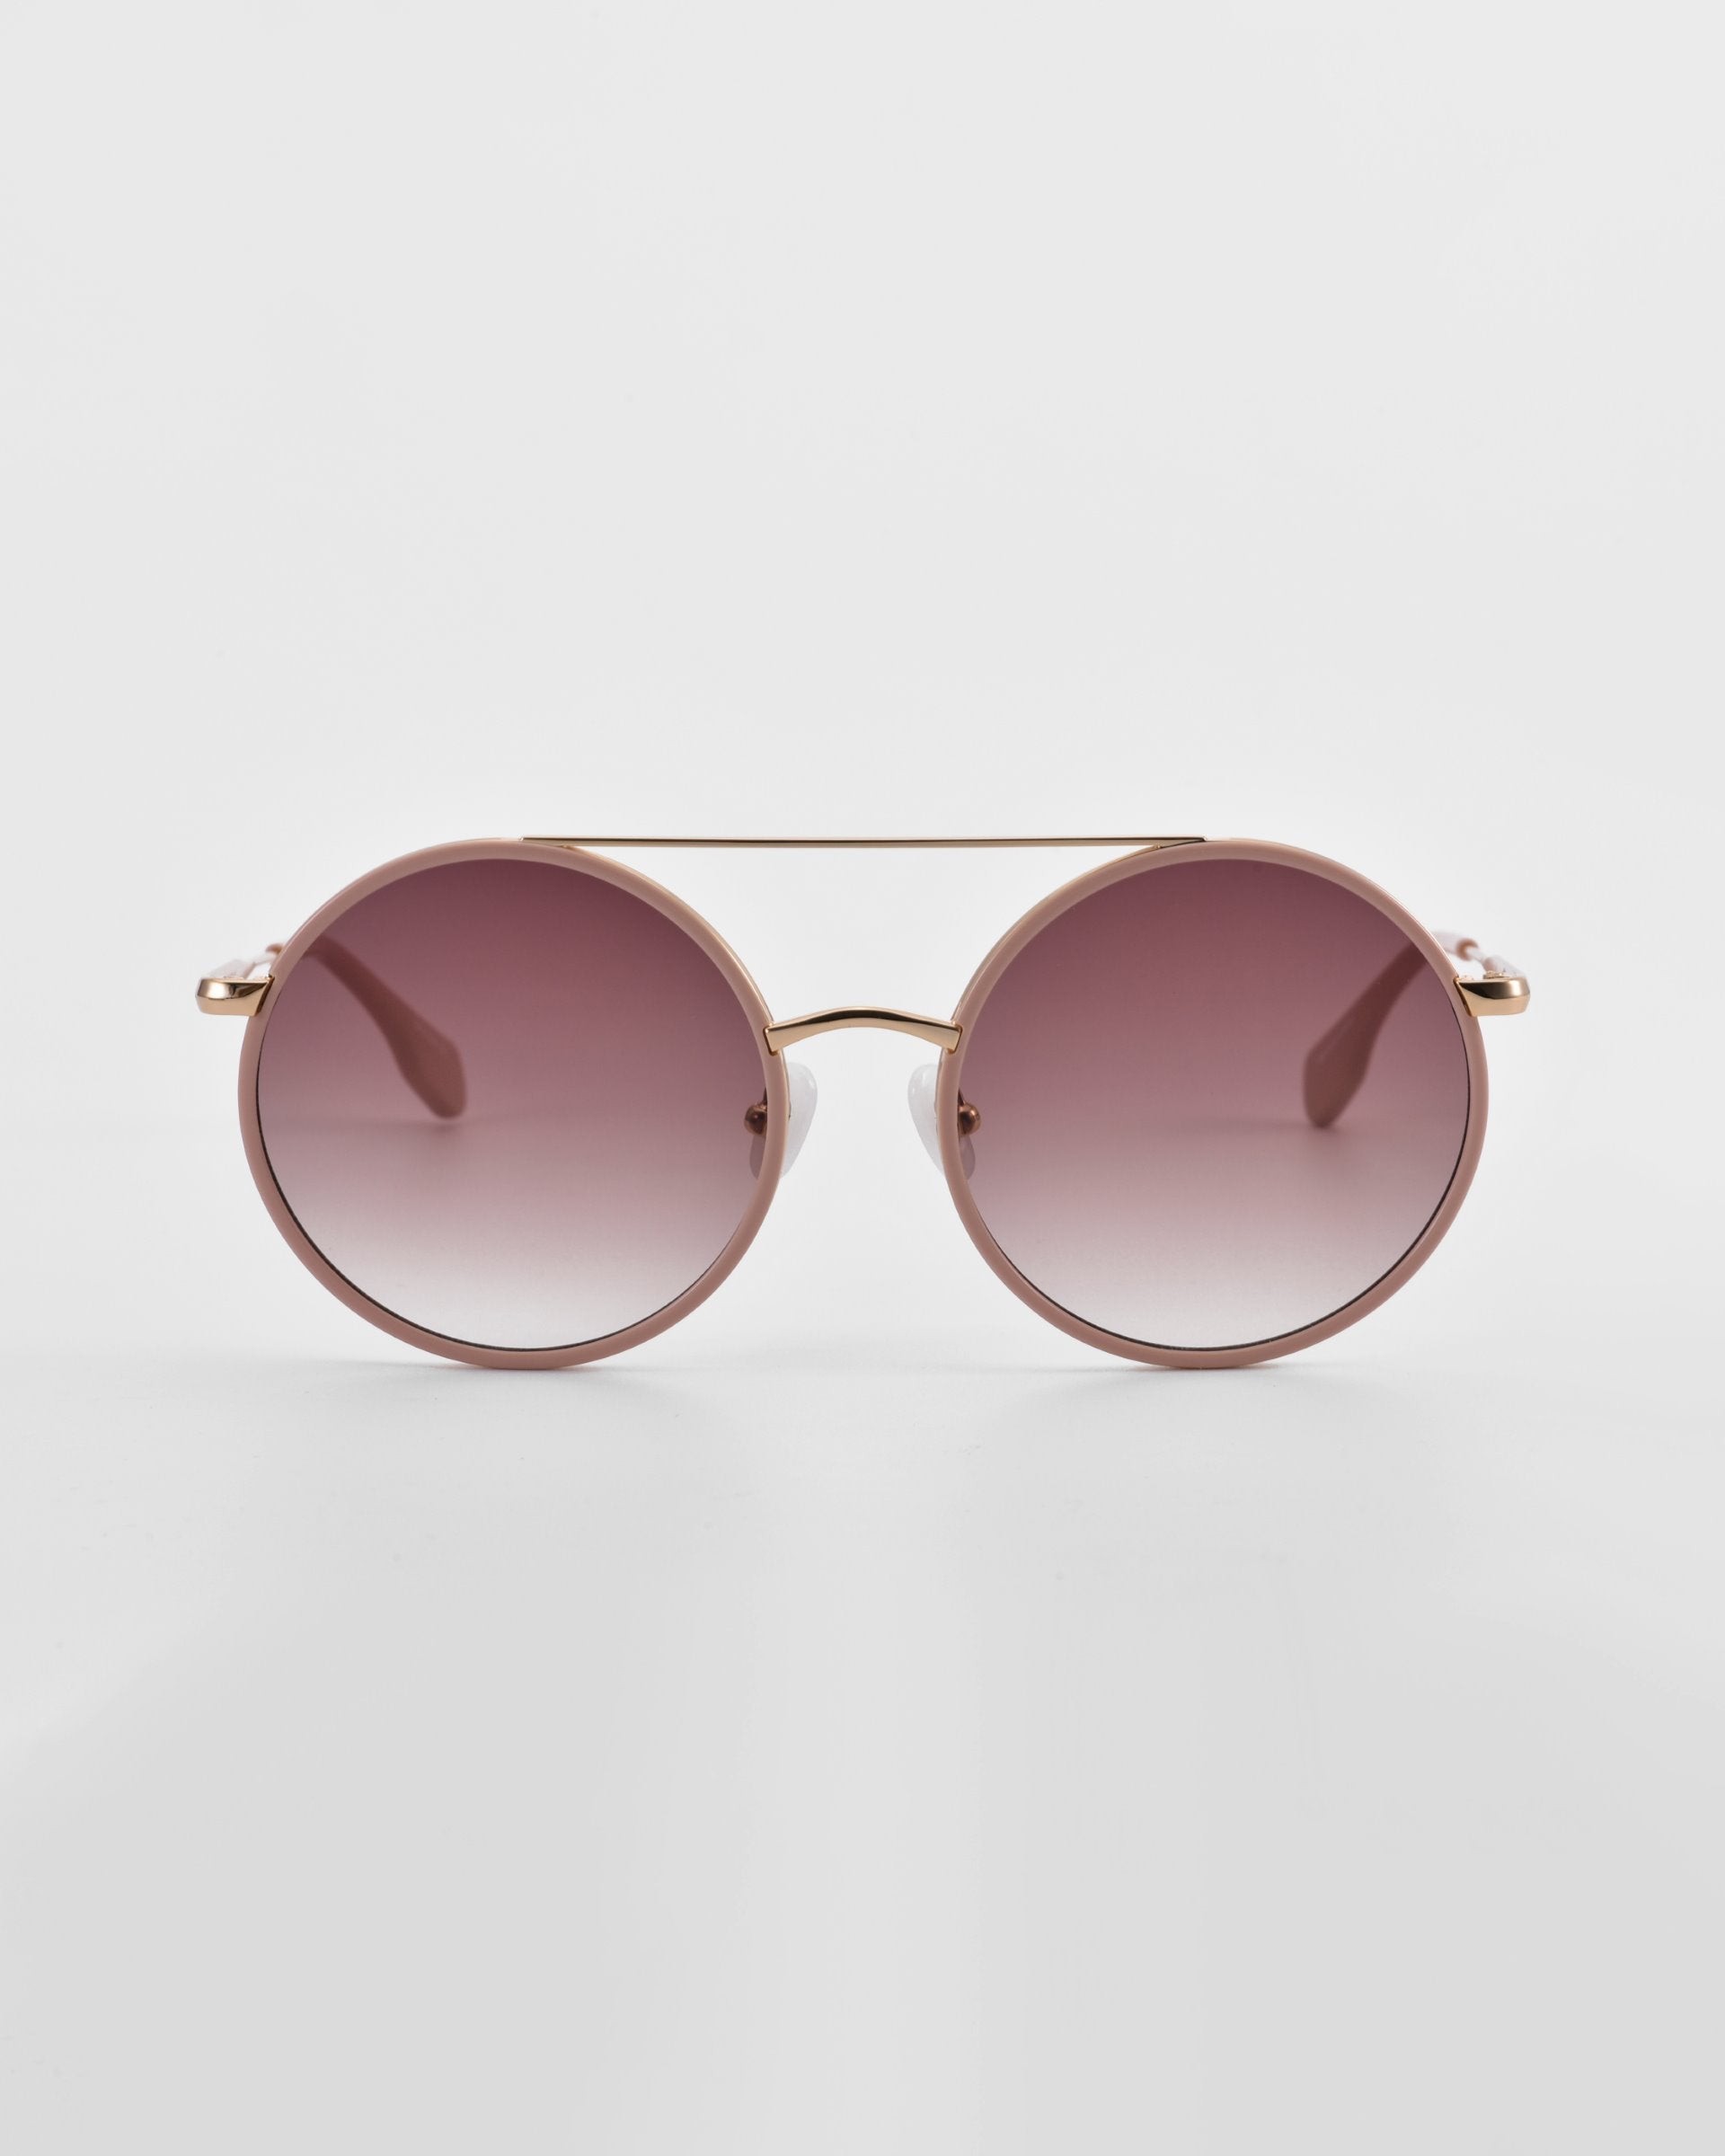 A pair of Orb by For Art&#39;s Sake® oversized round aviator sunglasses with dark tinted lenses and a thin, gold-colored frame. The Orb sunglasses, featuring elegant jade-stone nose pads, are positioned directly facing the camera on a white surface with a minimalist backdrop.